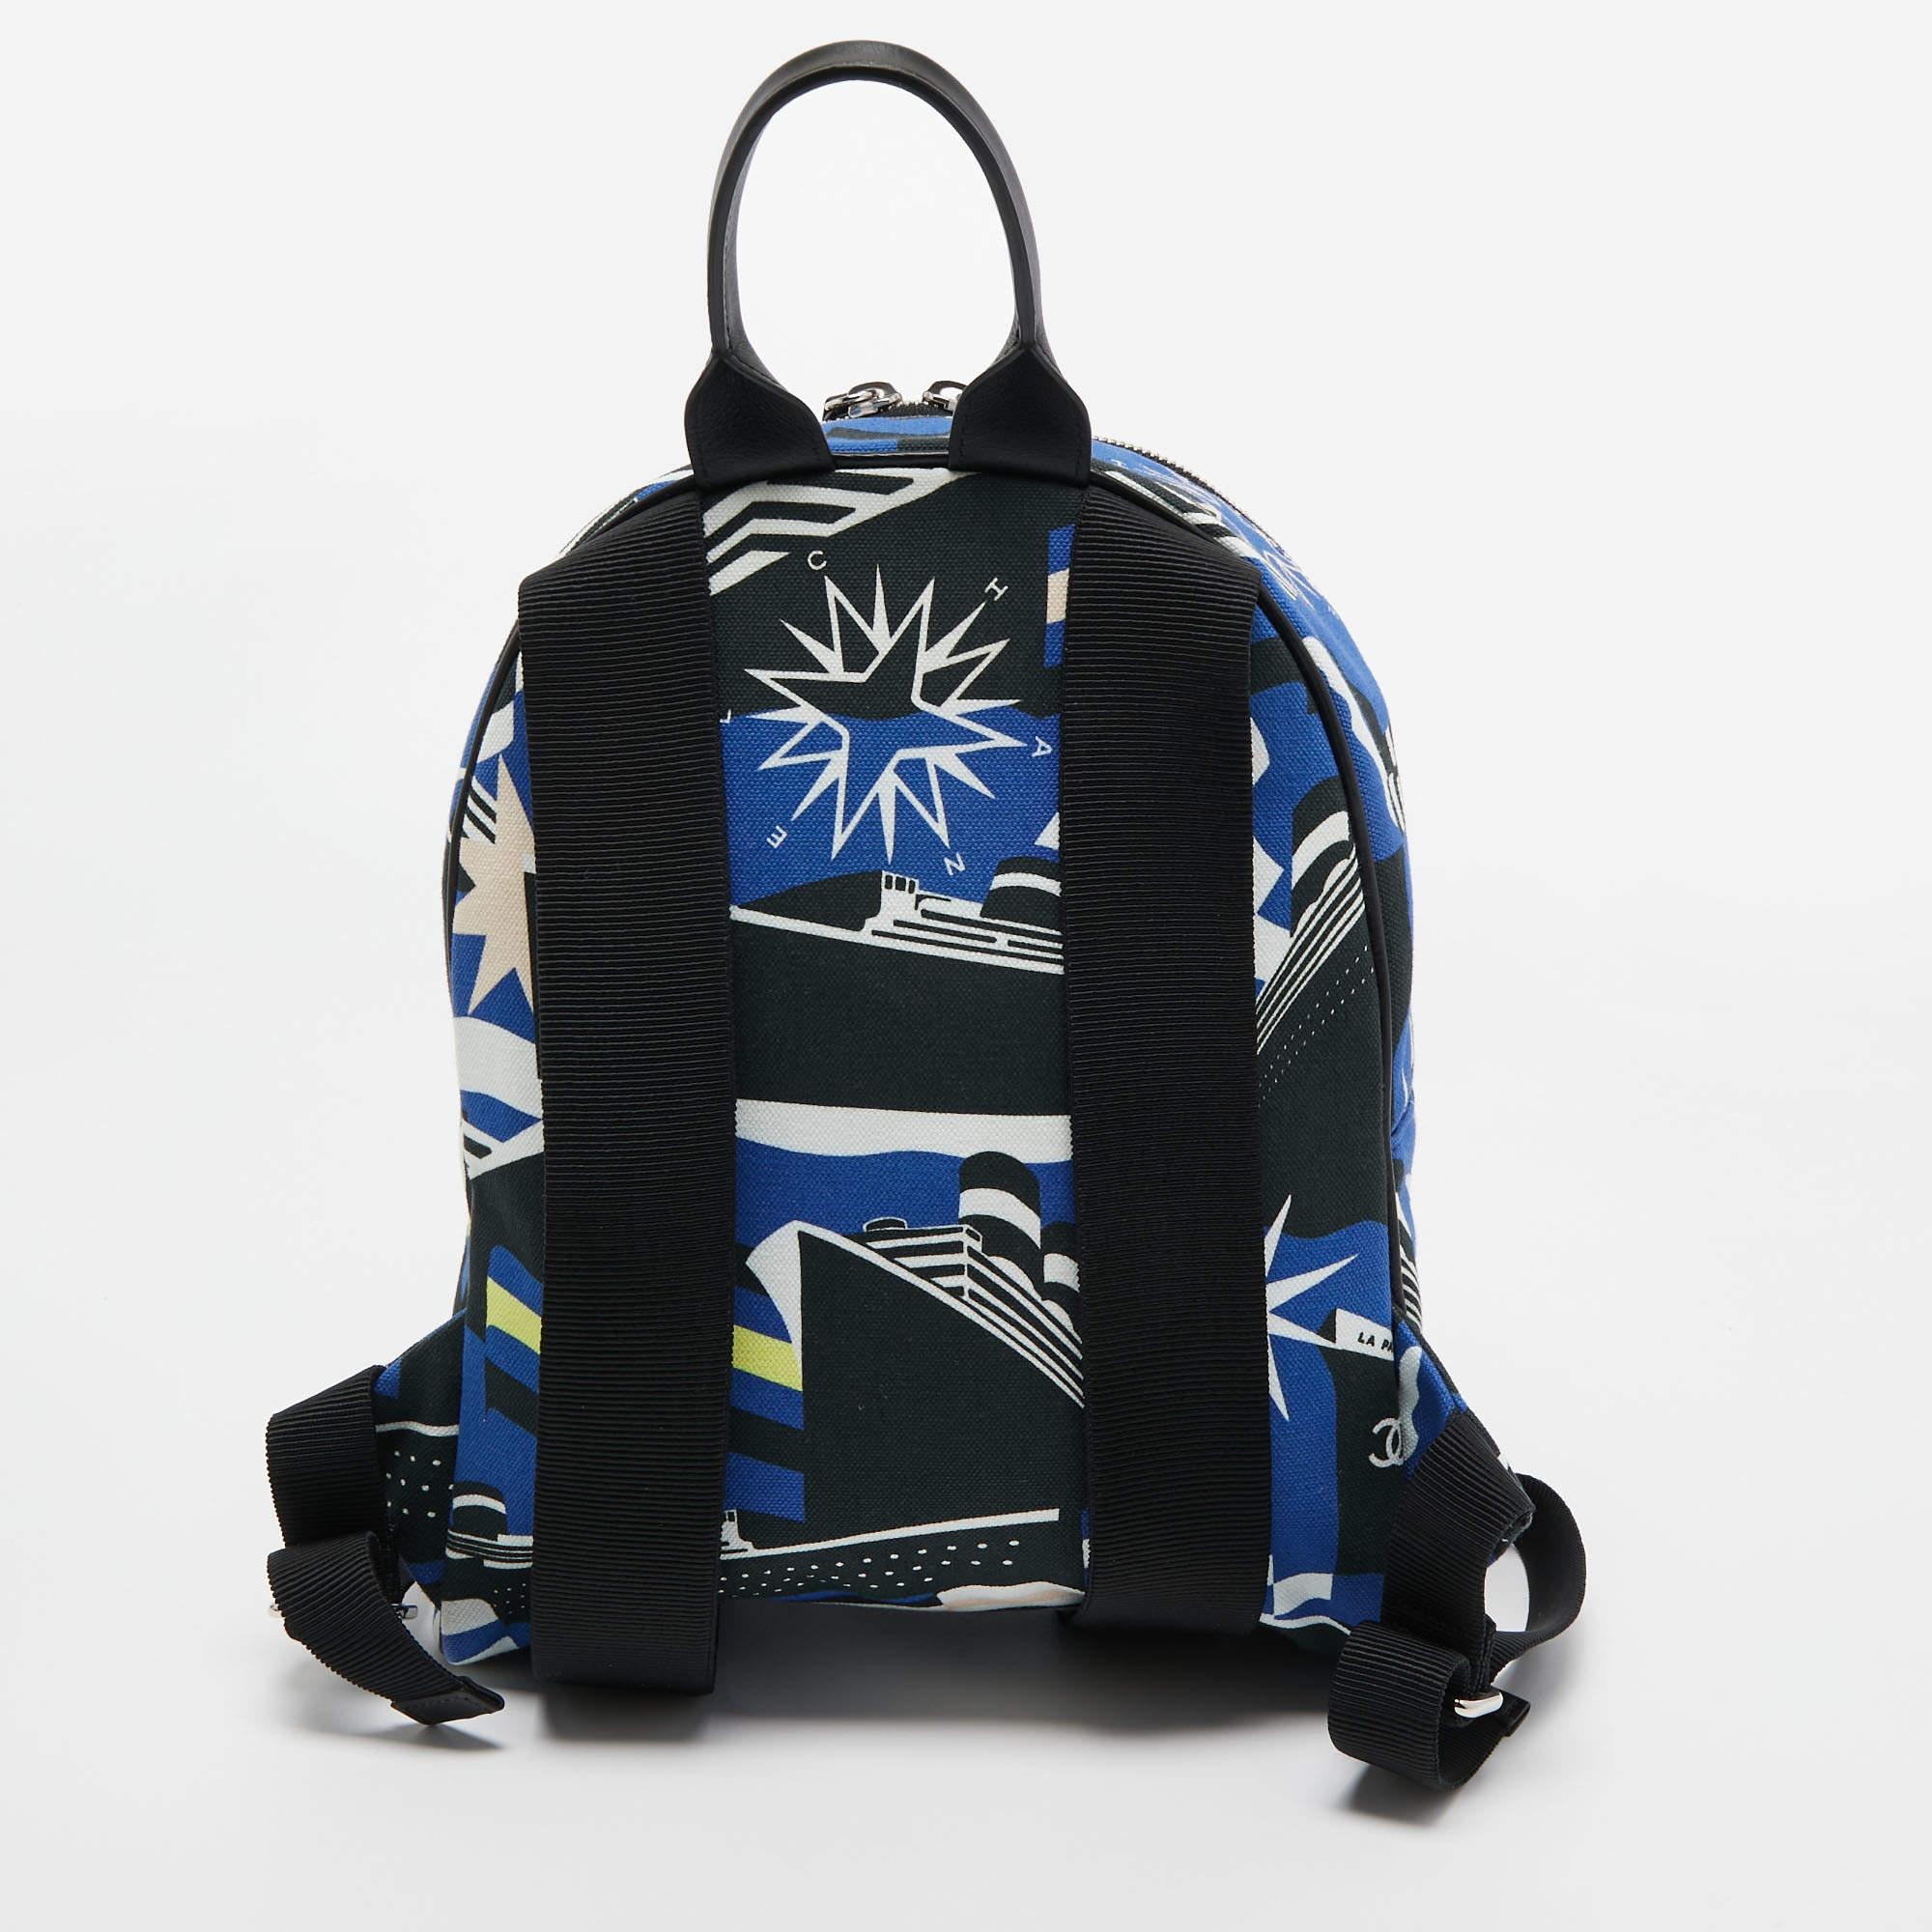 Crafted from quality materials, your wardrobe is missing out on this designer backpack. Look your fashionable best in any outfit with this stylish backpack that promises to elevate your ensemble.

Includes: Authenticity Card, Brand Dustbag